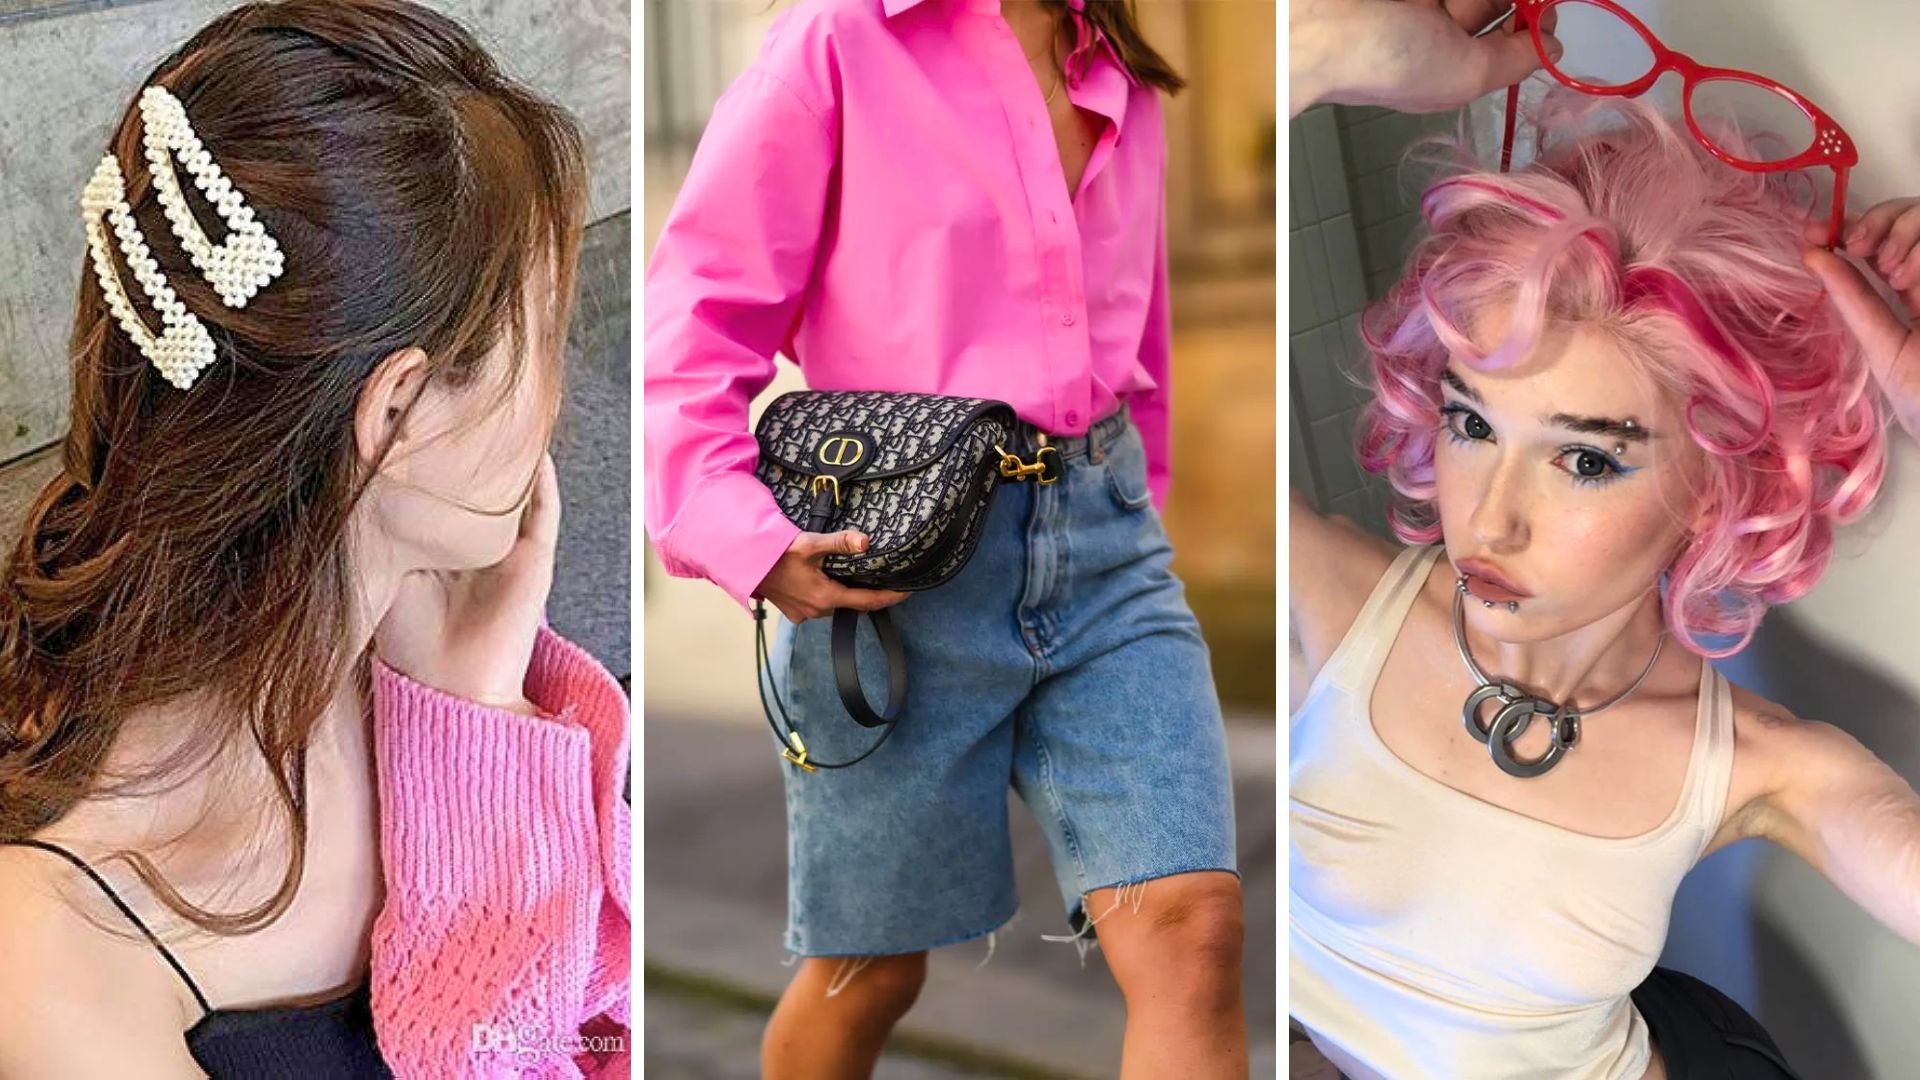 An Ultimate Guide: Your Top 10 Essential E-Girl Wardrobe Staples